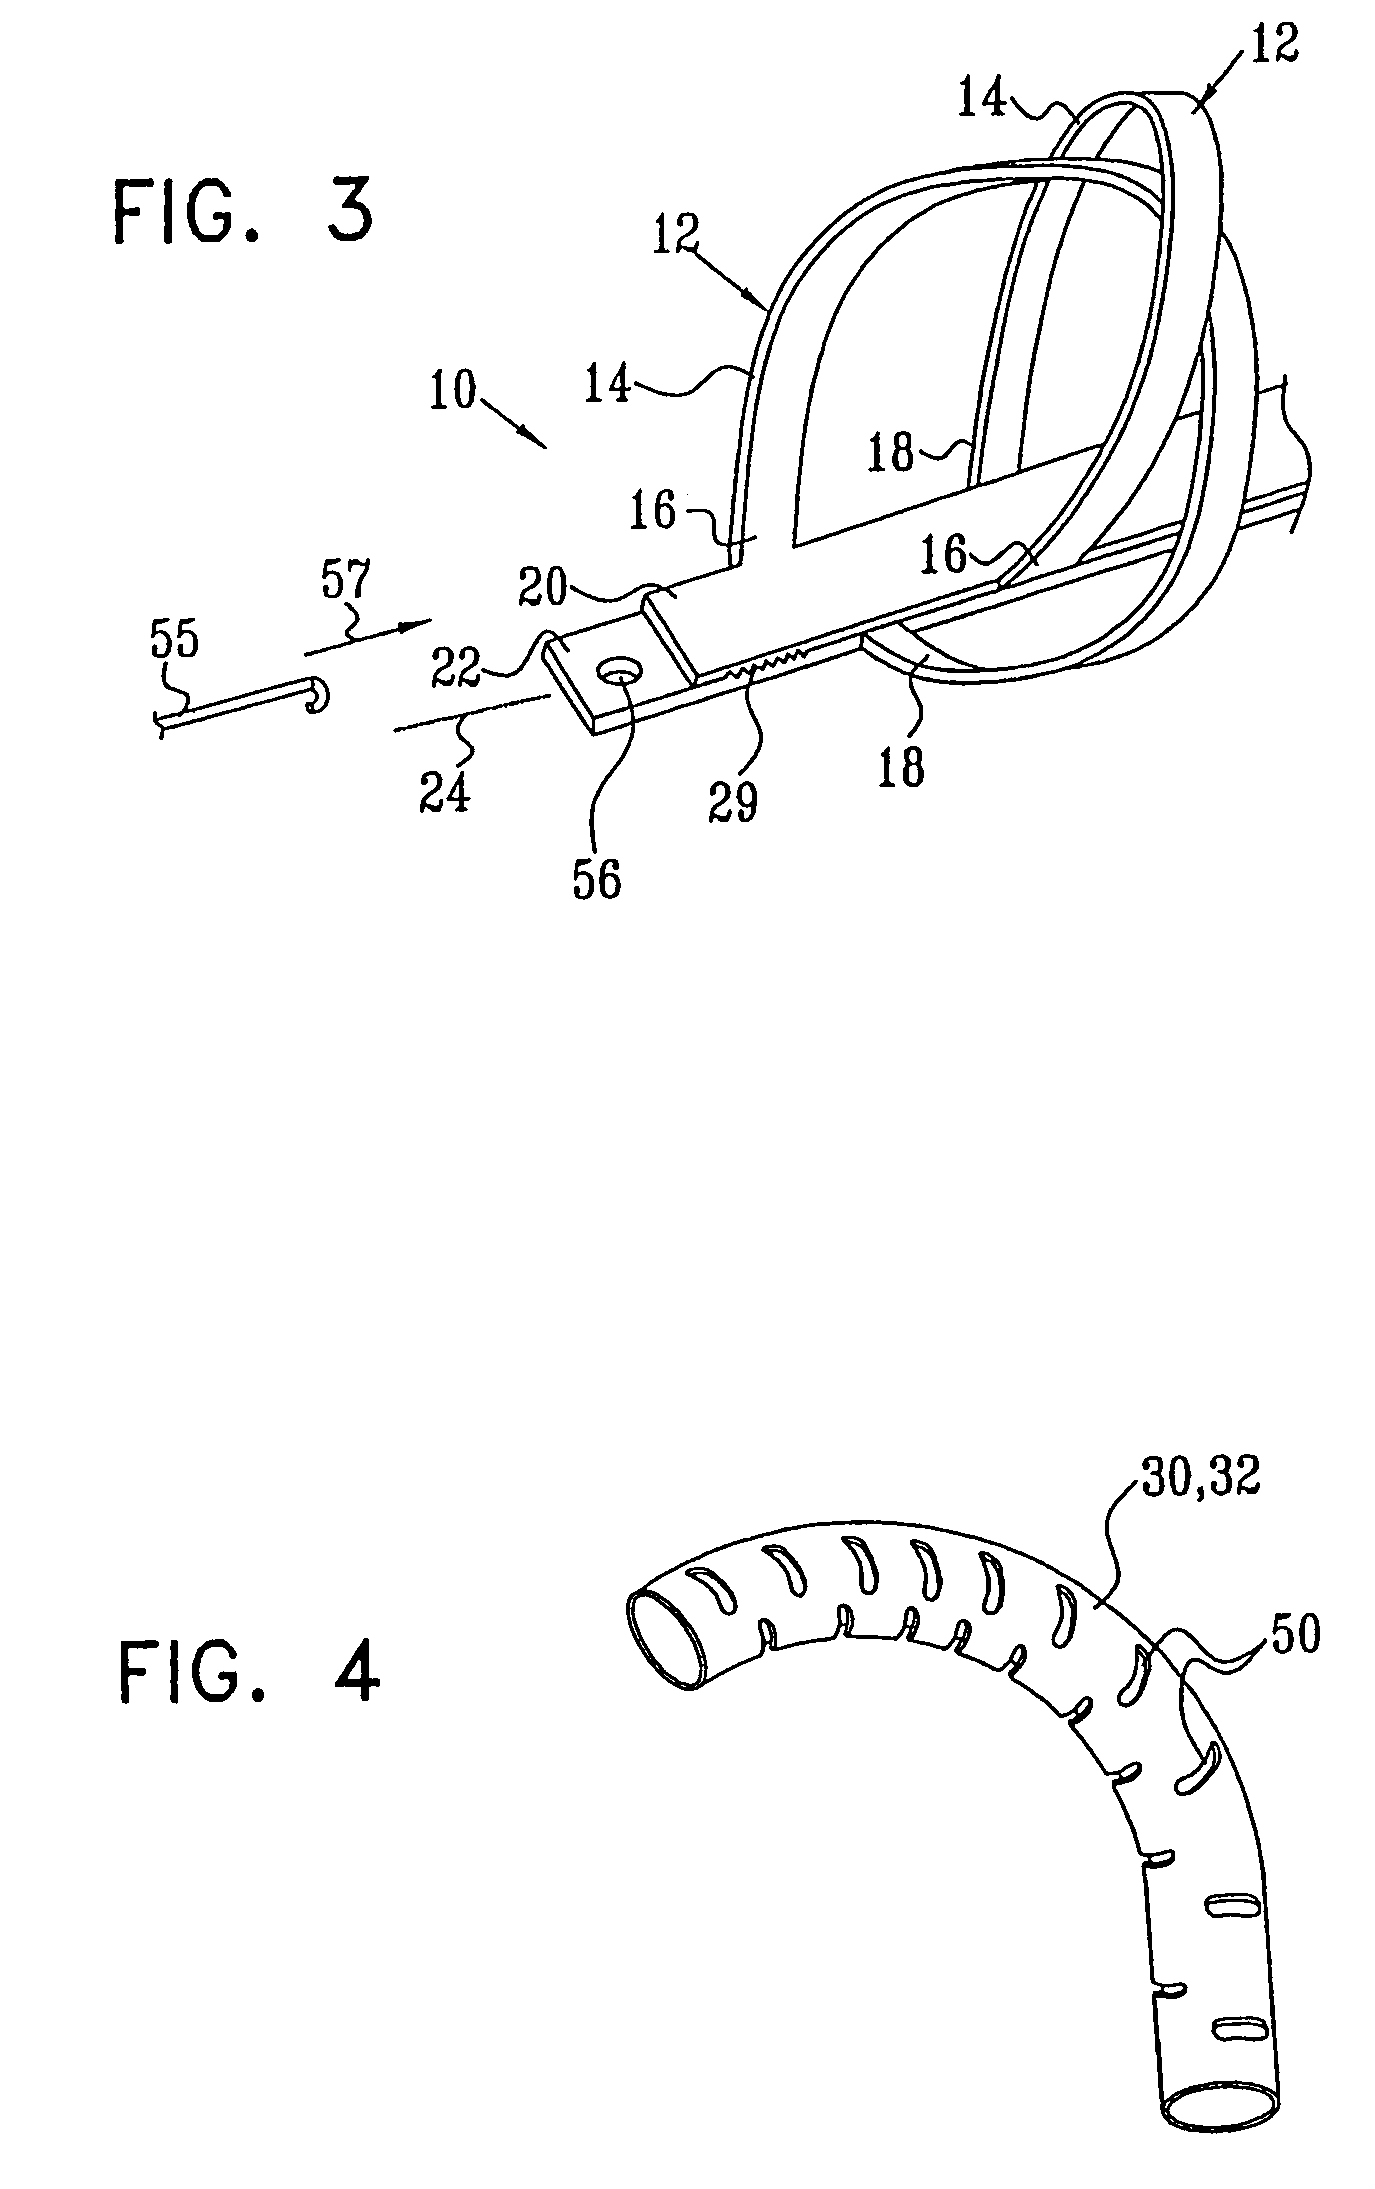 Selectively expandable and releasable stent